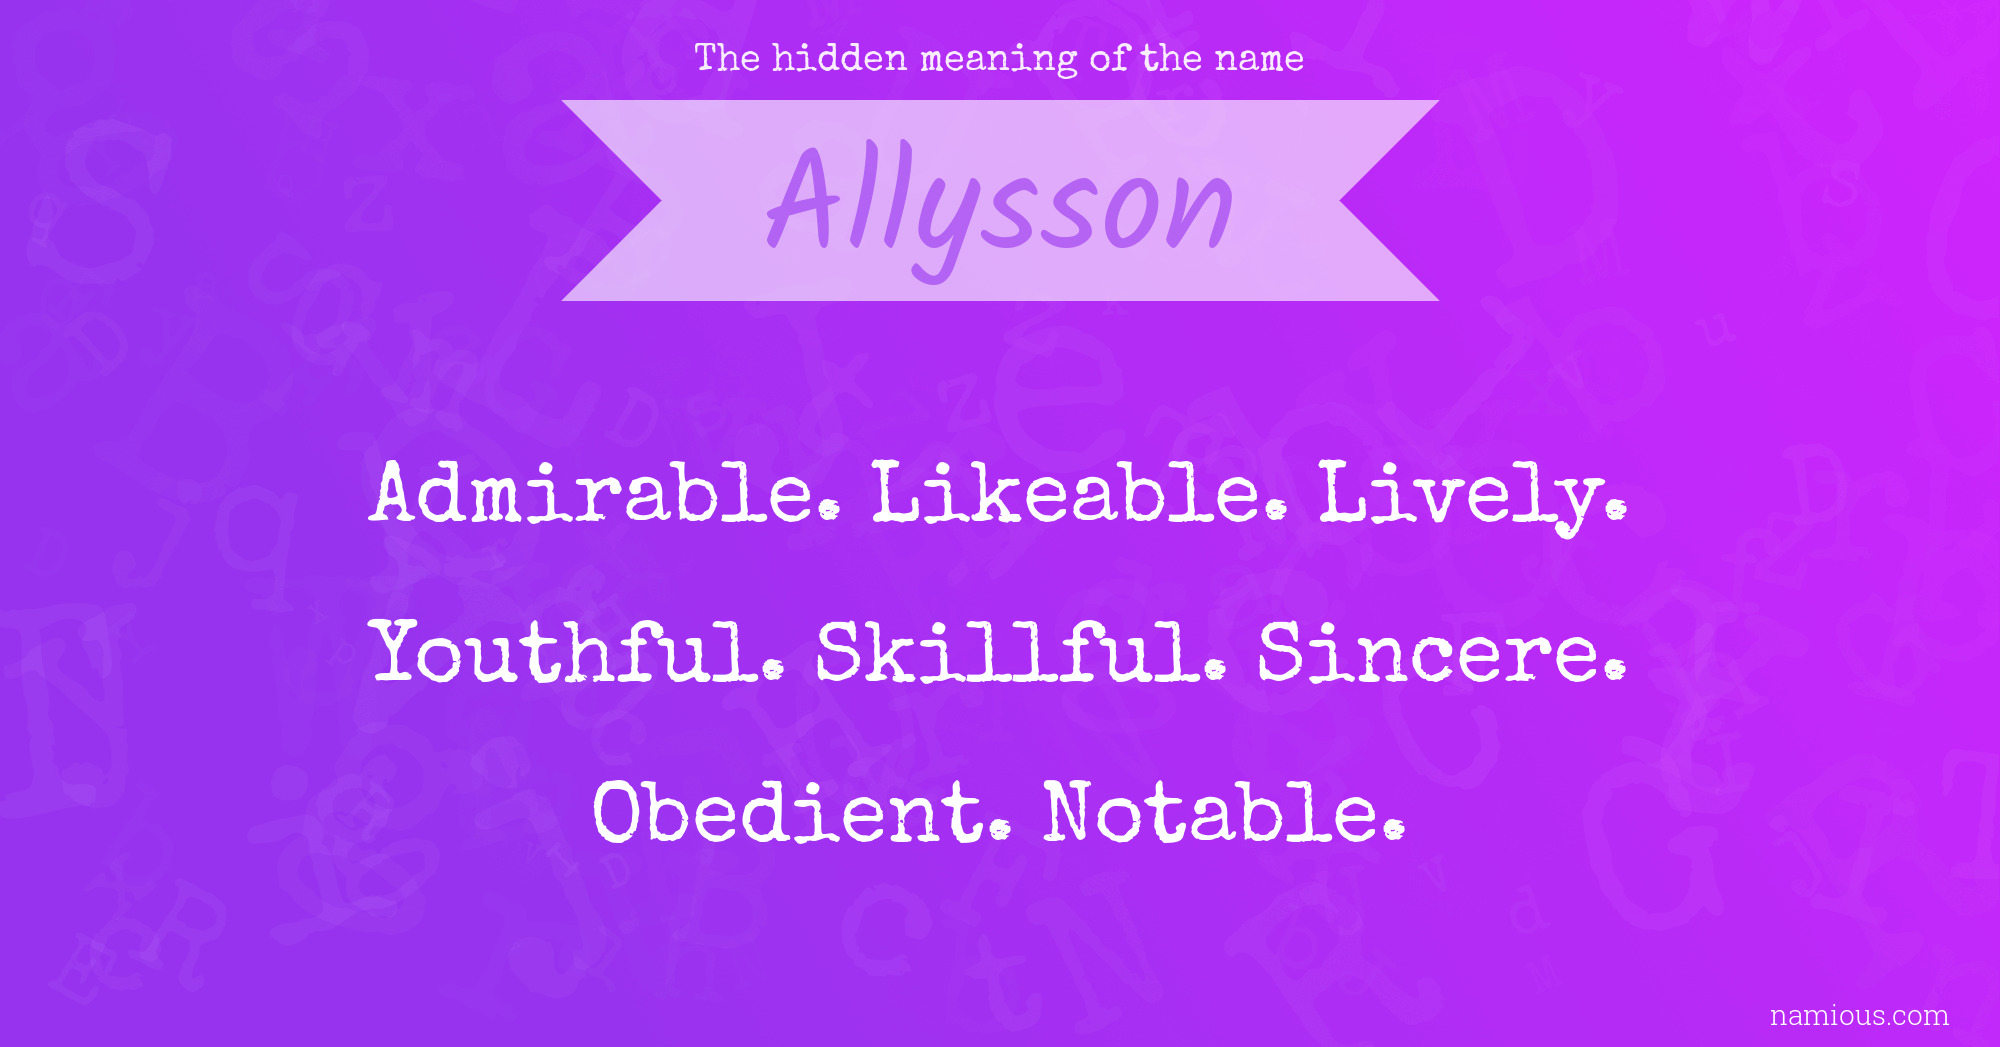 The hidden meaning of the name Allysson